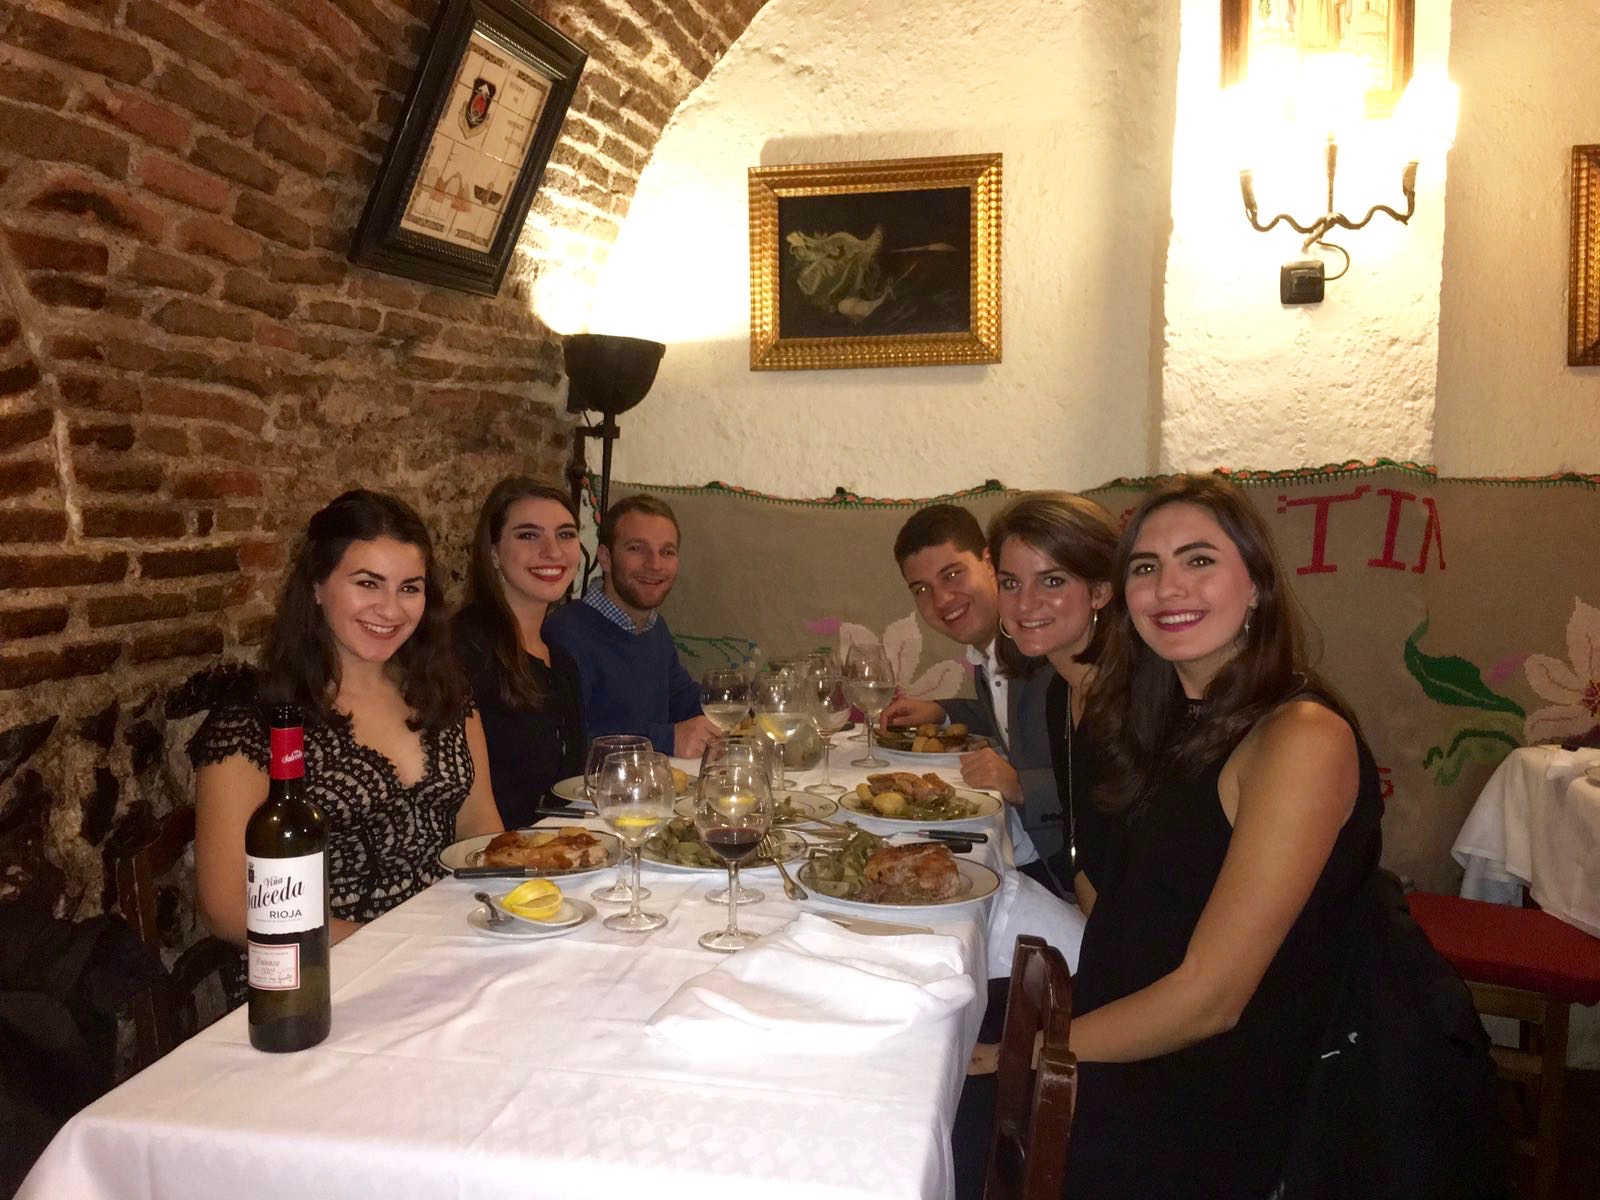 Katherine and some friends toward the end of their semester, eating cuchinillo at the oldest restaurant in the world, where Hemingway loved to go.